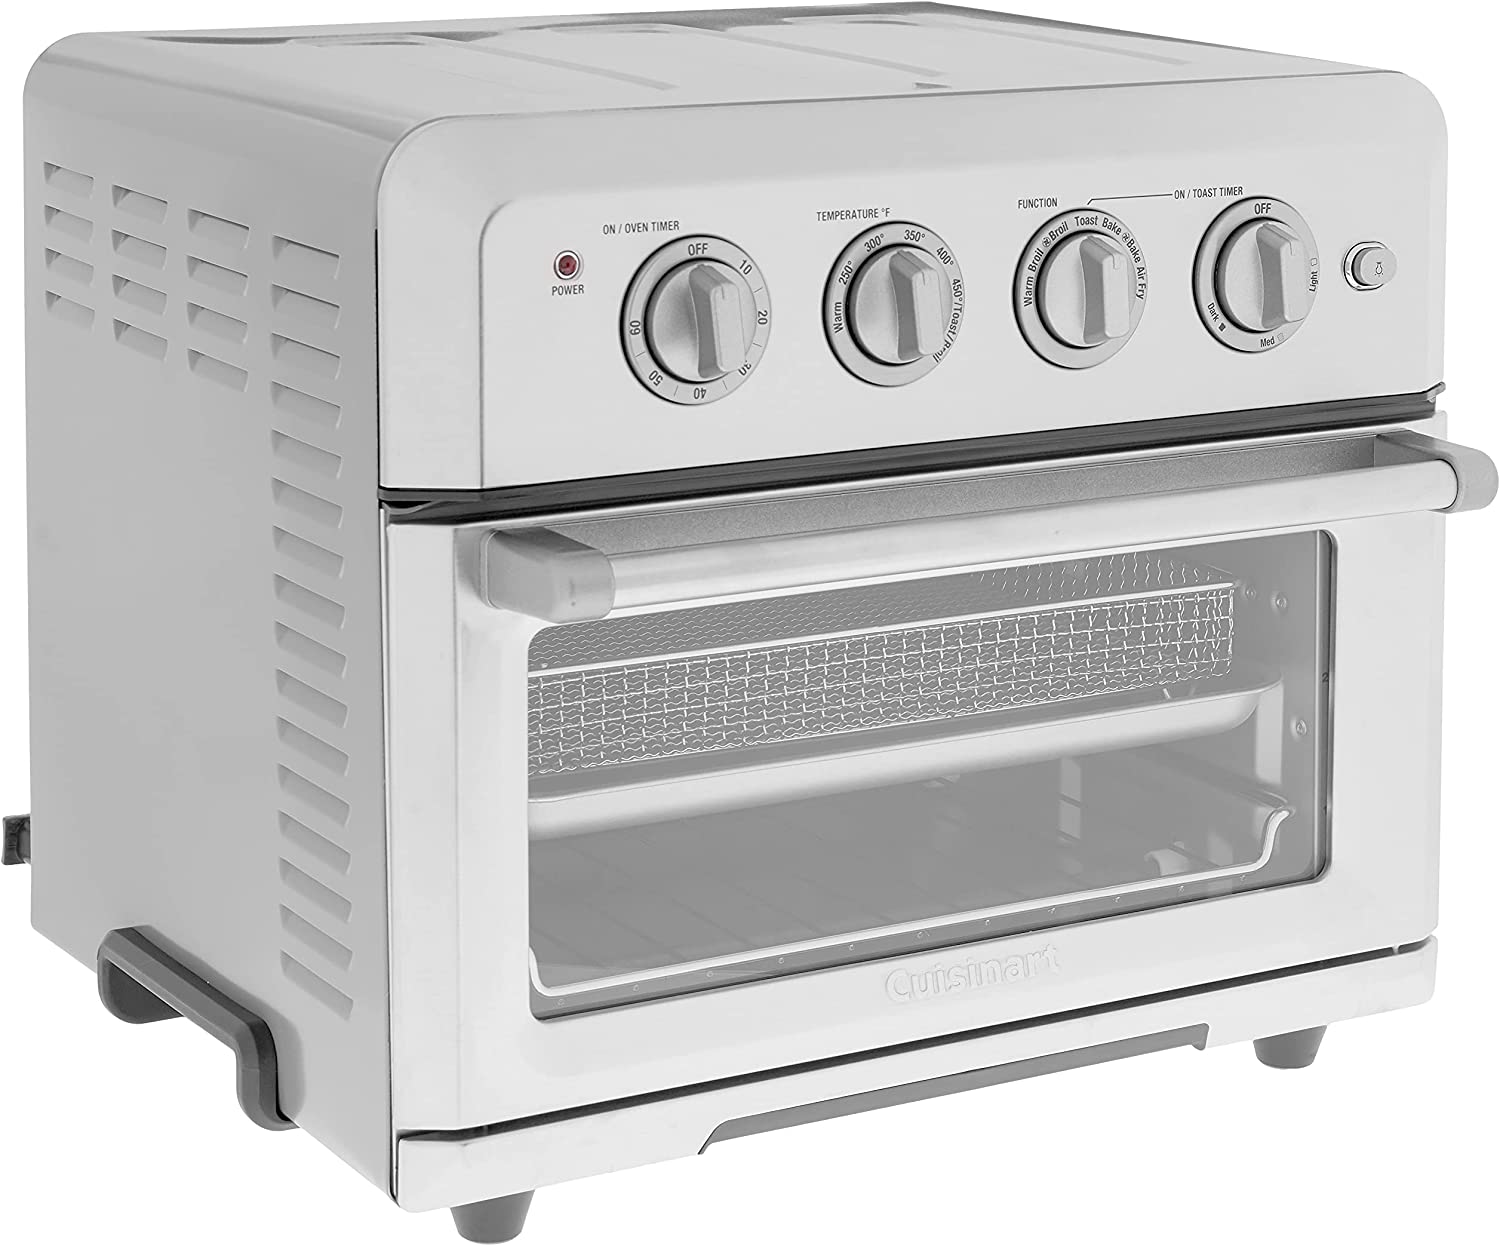 Cuisinart CTOA-122 Convection Toaster Oven Airfryer Stainless Steel